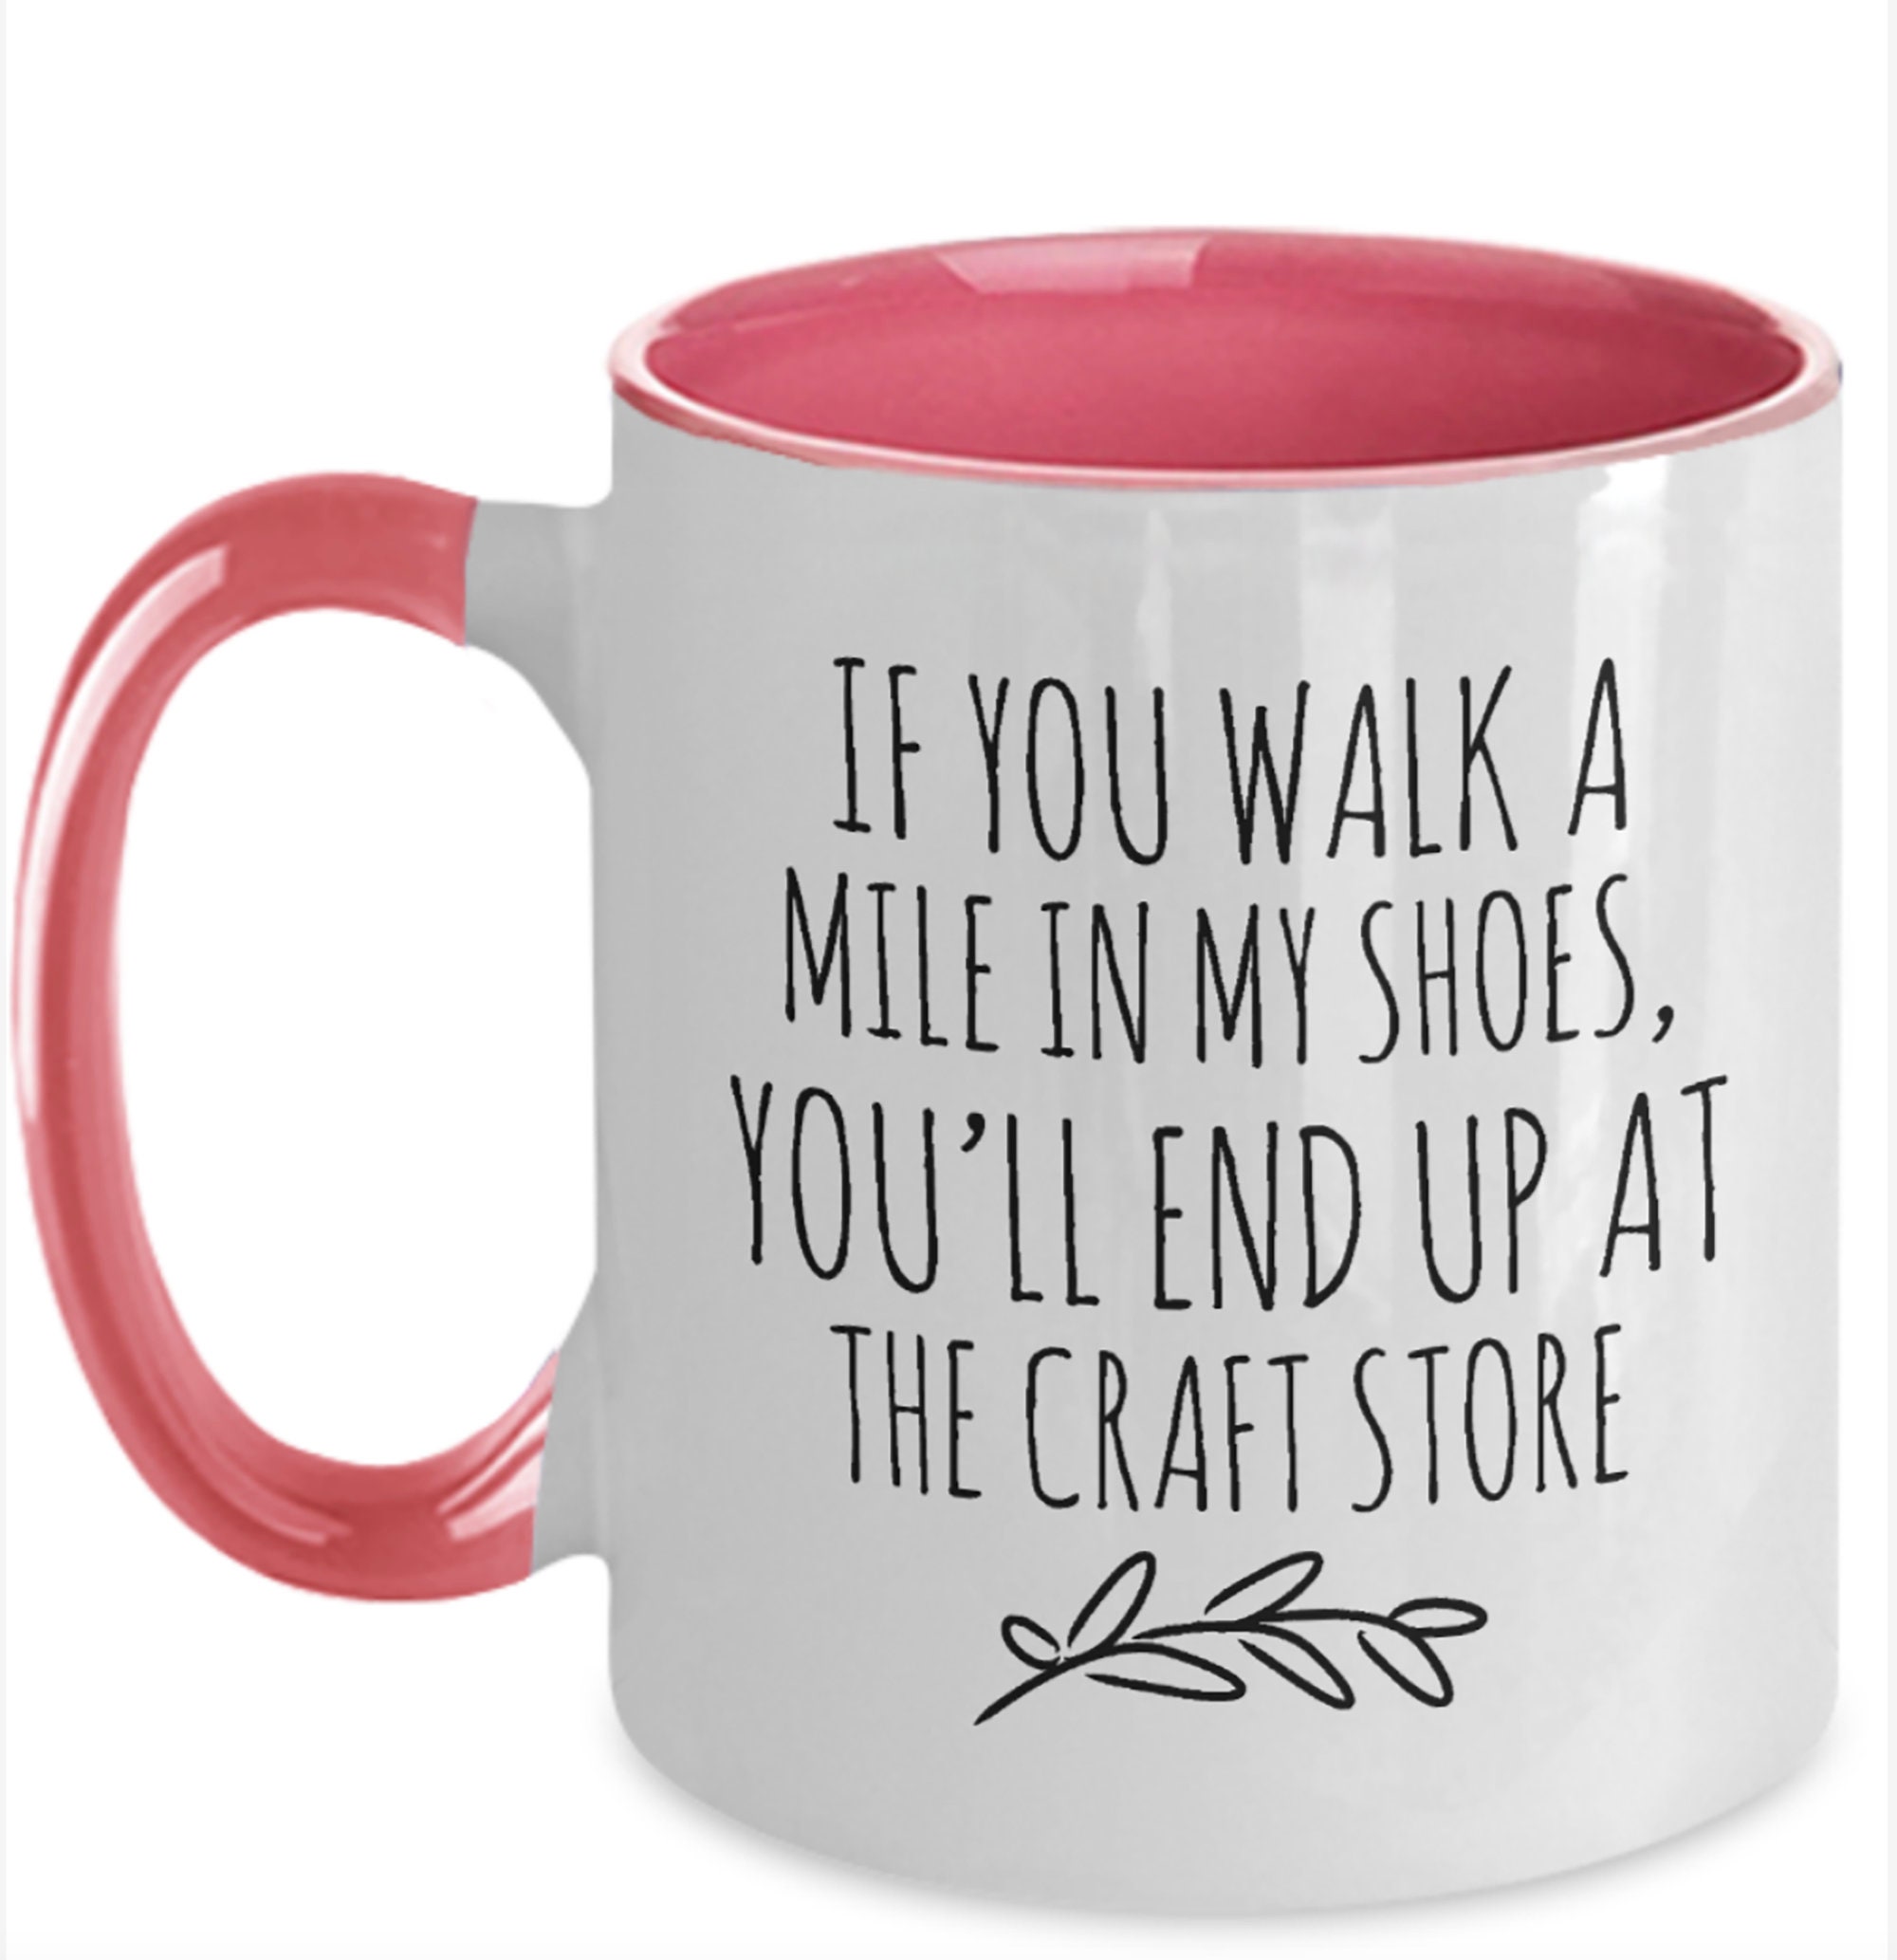 Gifts for Crafty Women, Coffee Mug for Crafter, Gift for Crafty Person,  Gifts for Crafty People, Mug for Mom, Funny Mugs 